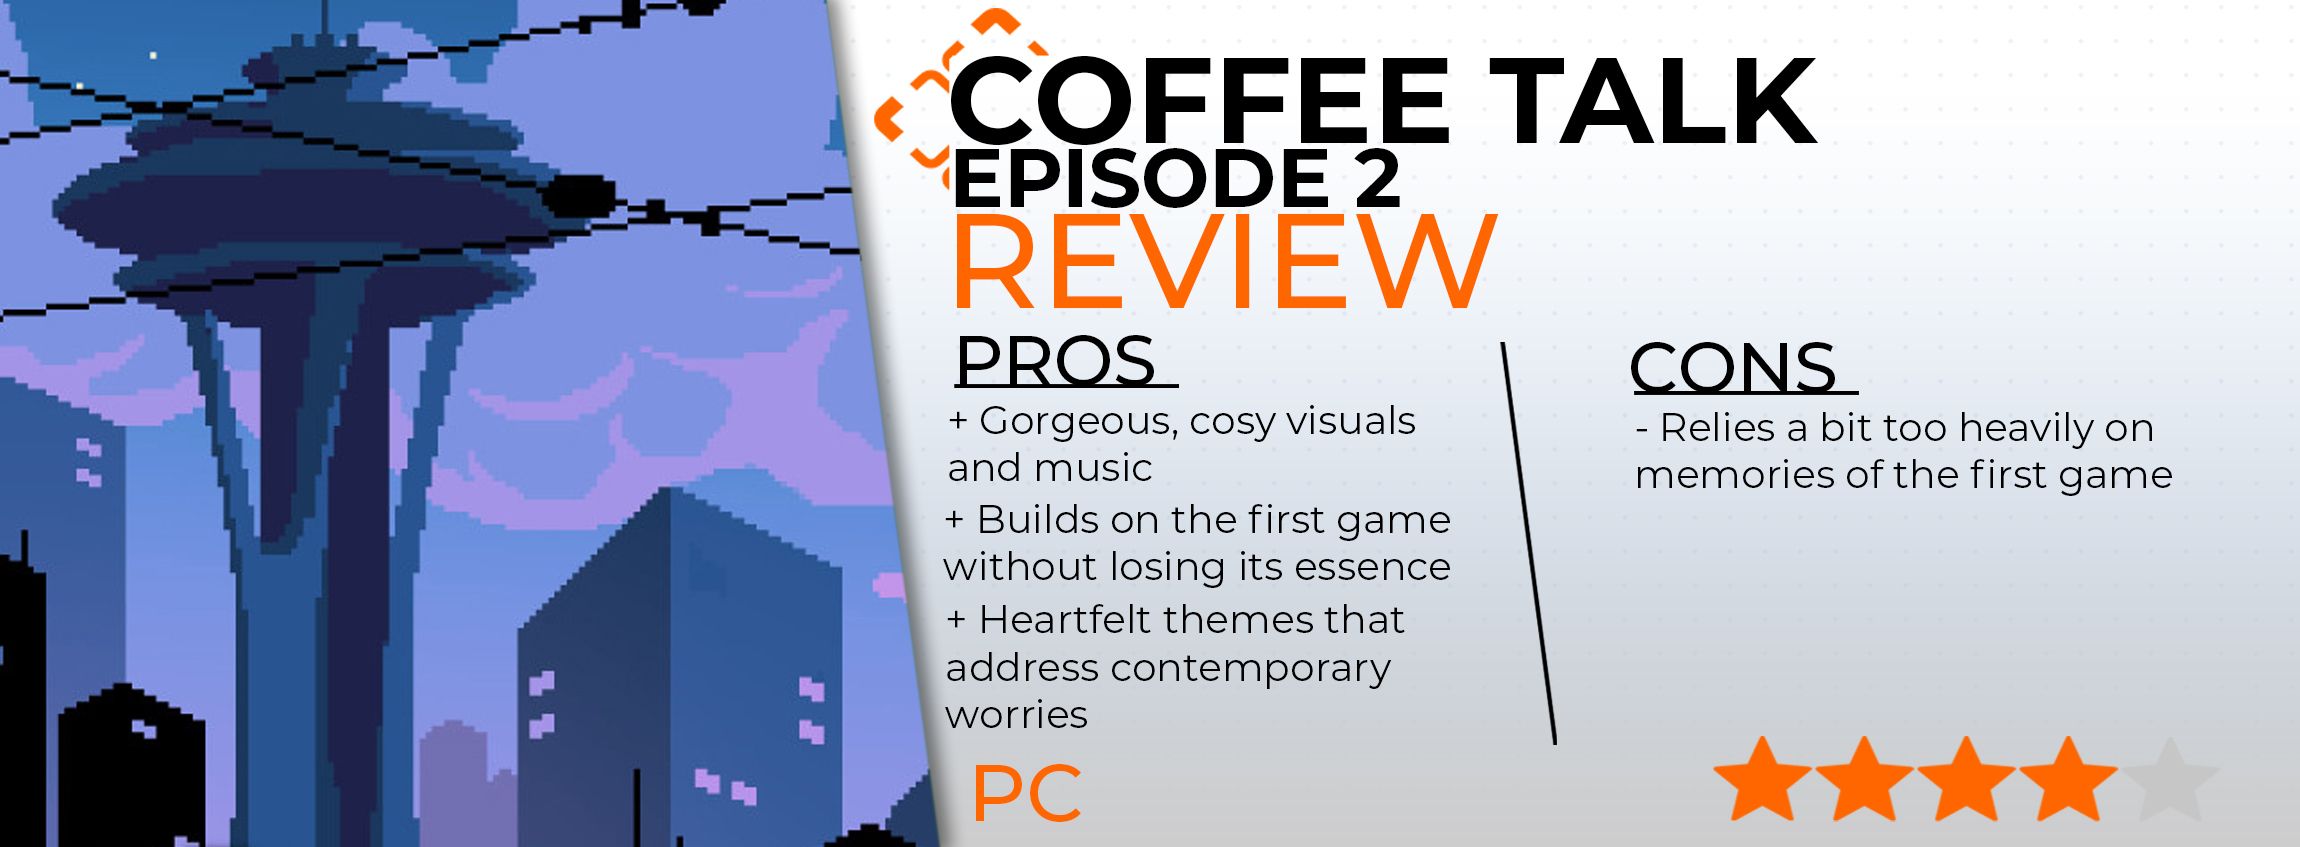 Coffee Talk ep2 review card